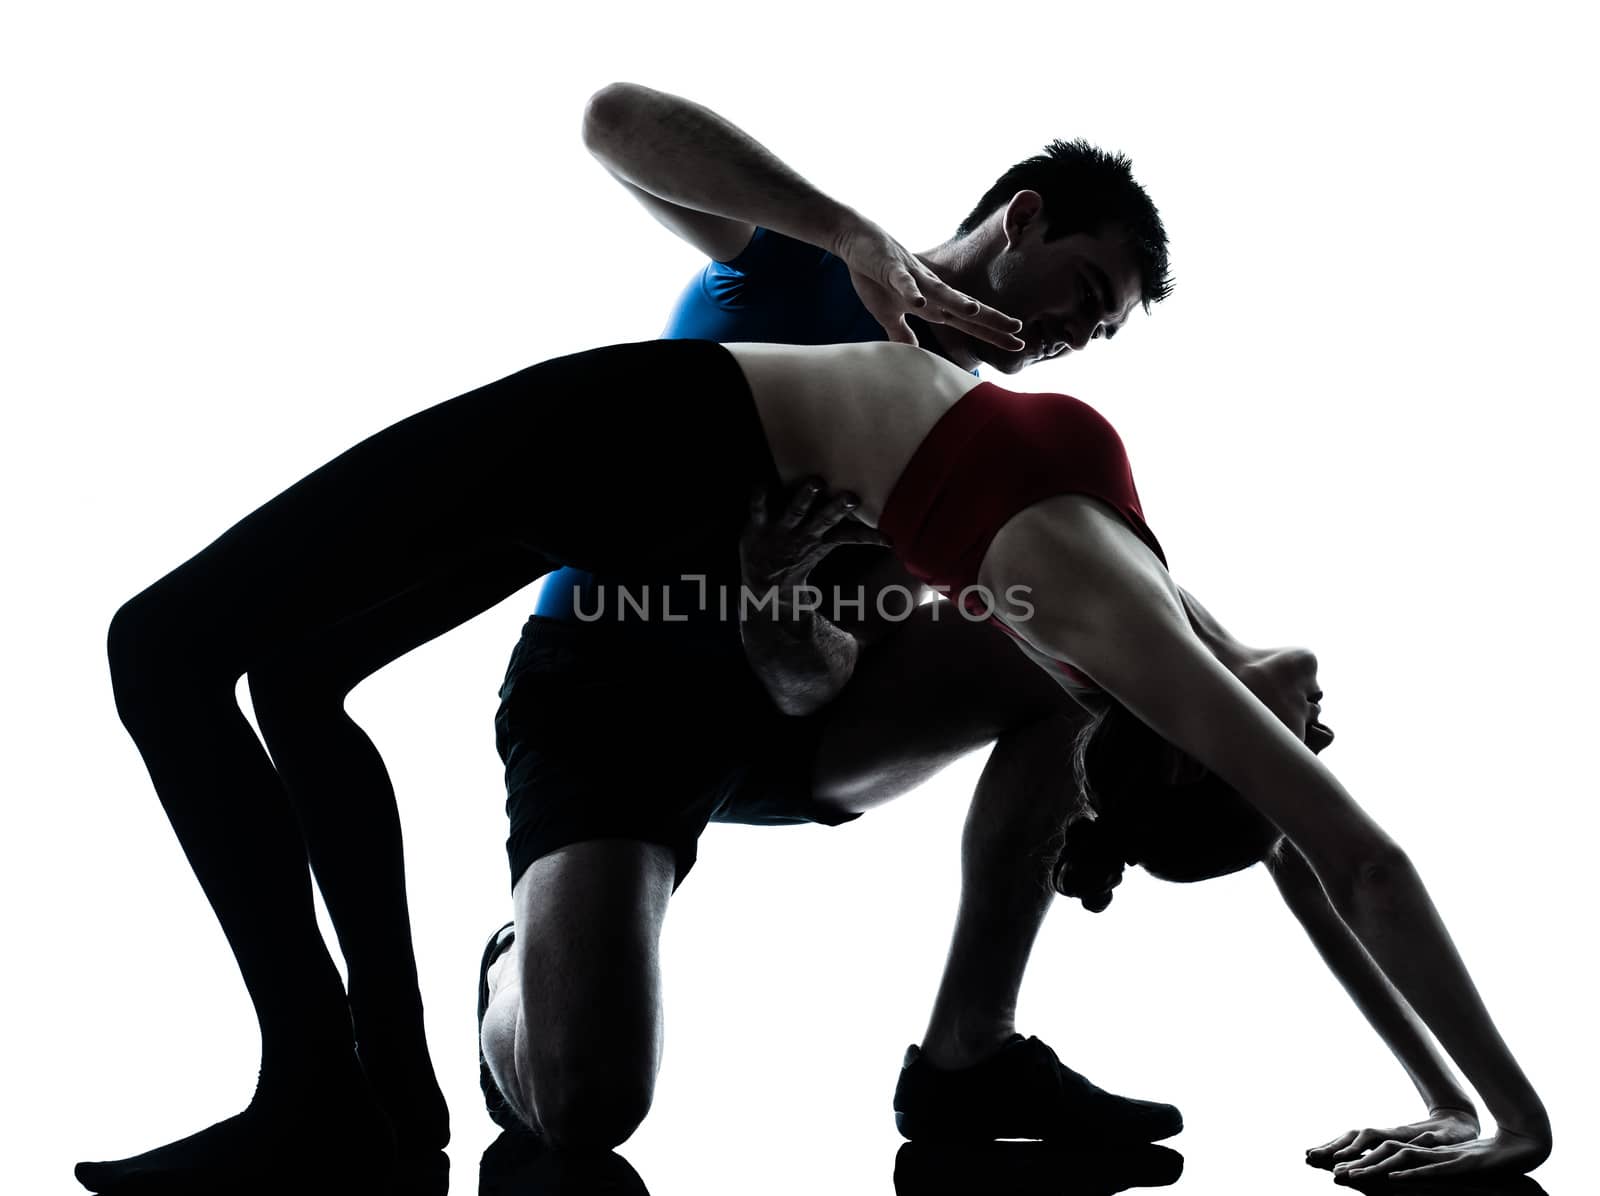 personal trainer man coach and woman exercising yoga bridge position gymnastic silhouette studio isolated on white background